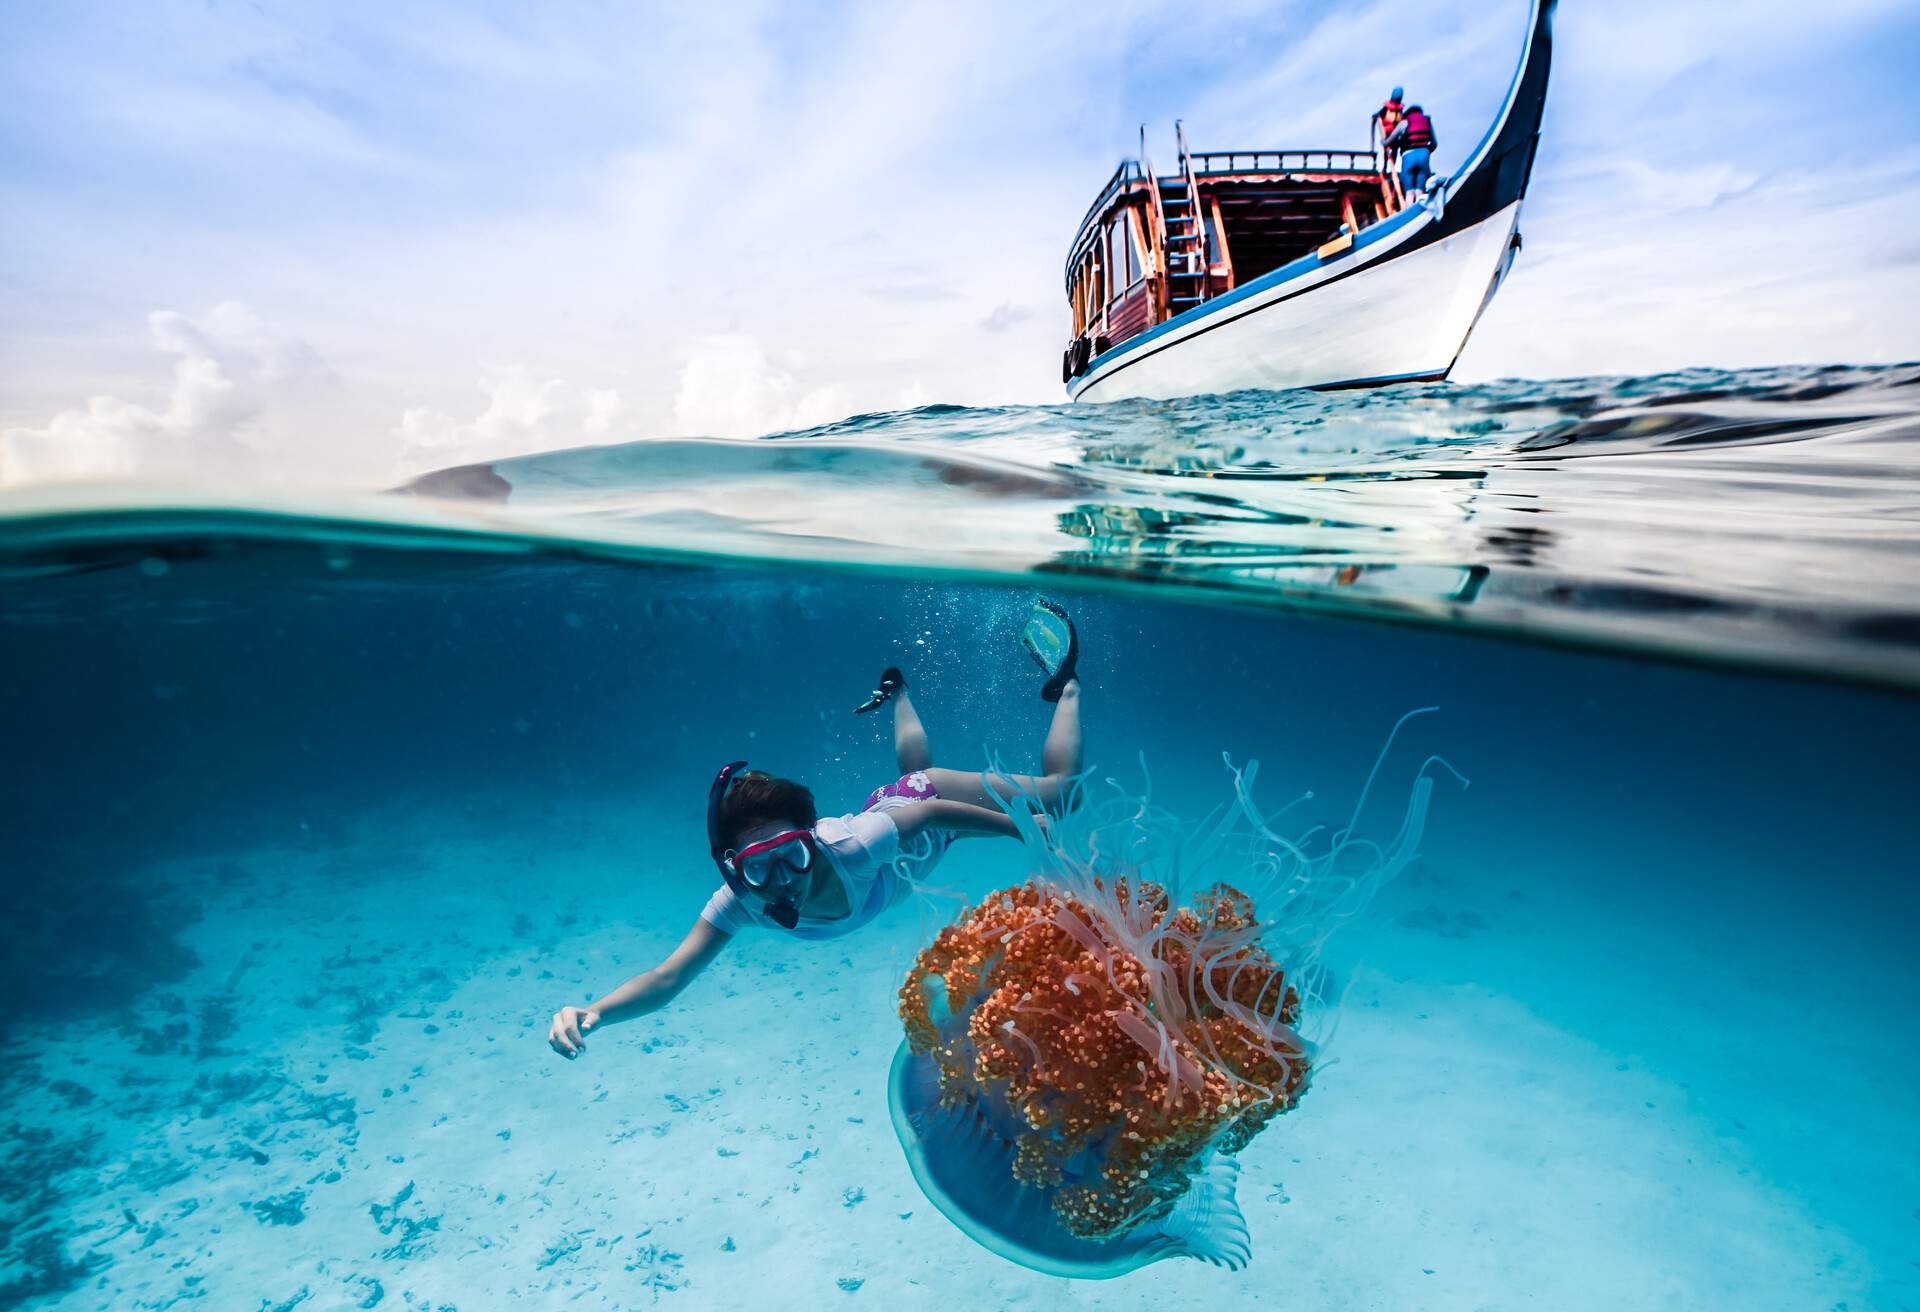 A snorkeller catches a glimpse of a beautiful jellyfish underwater, above a boat.